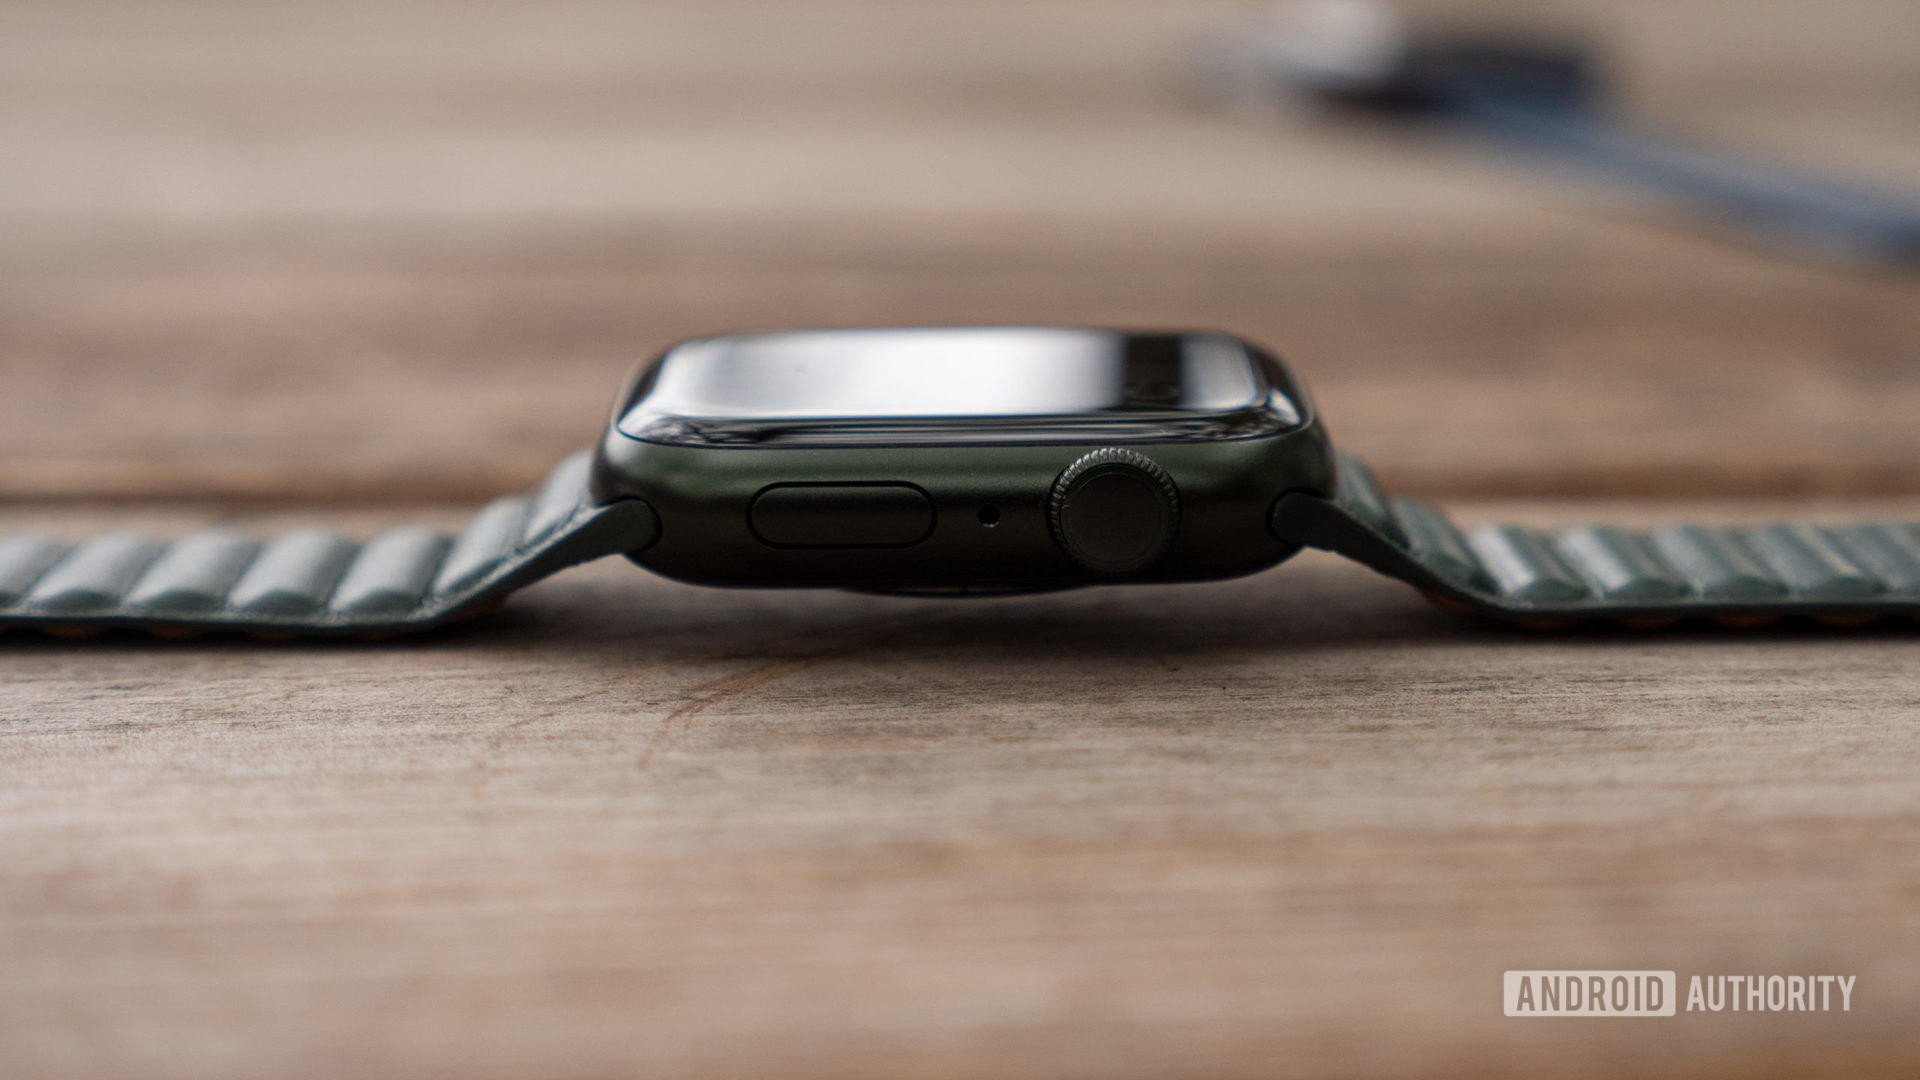 An Apple wearable rests sideways on a table, exposing its Digital Crown.